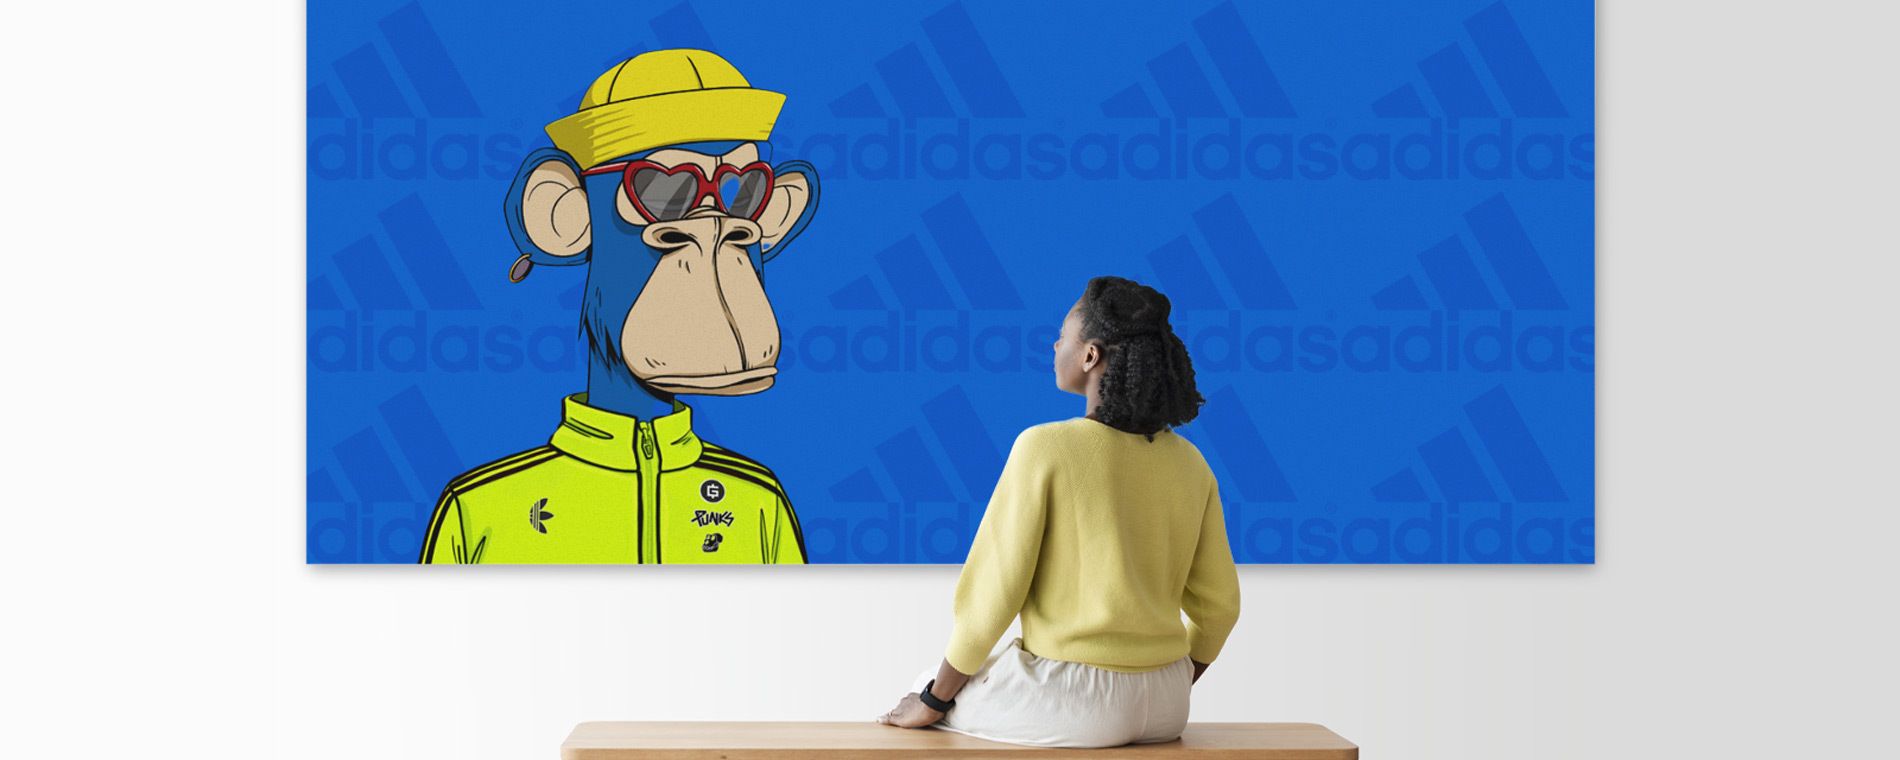 Adidas Joins NFT Race, Teams Up with Bored Ape and PUNKS Comic